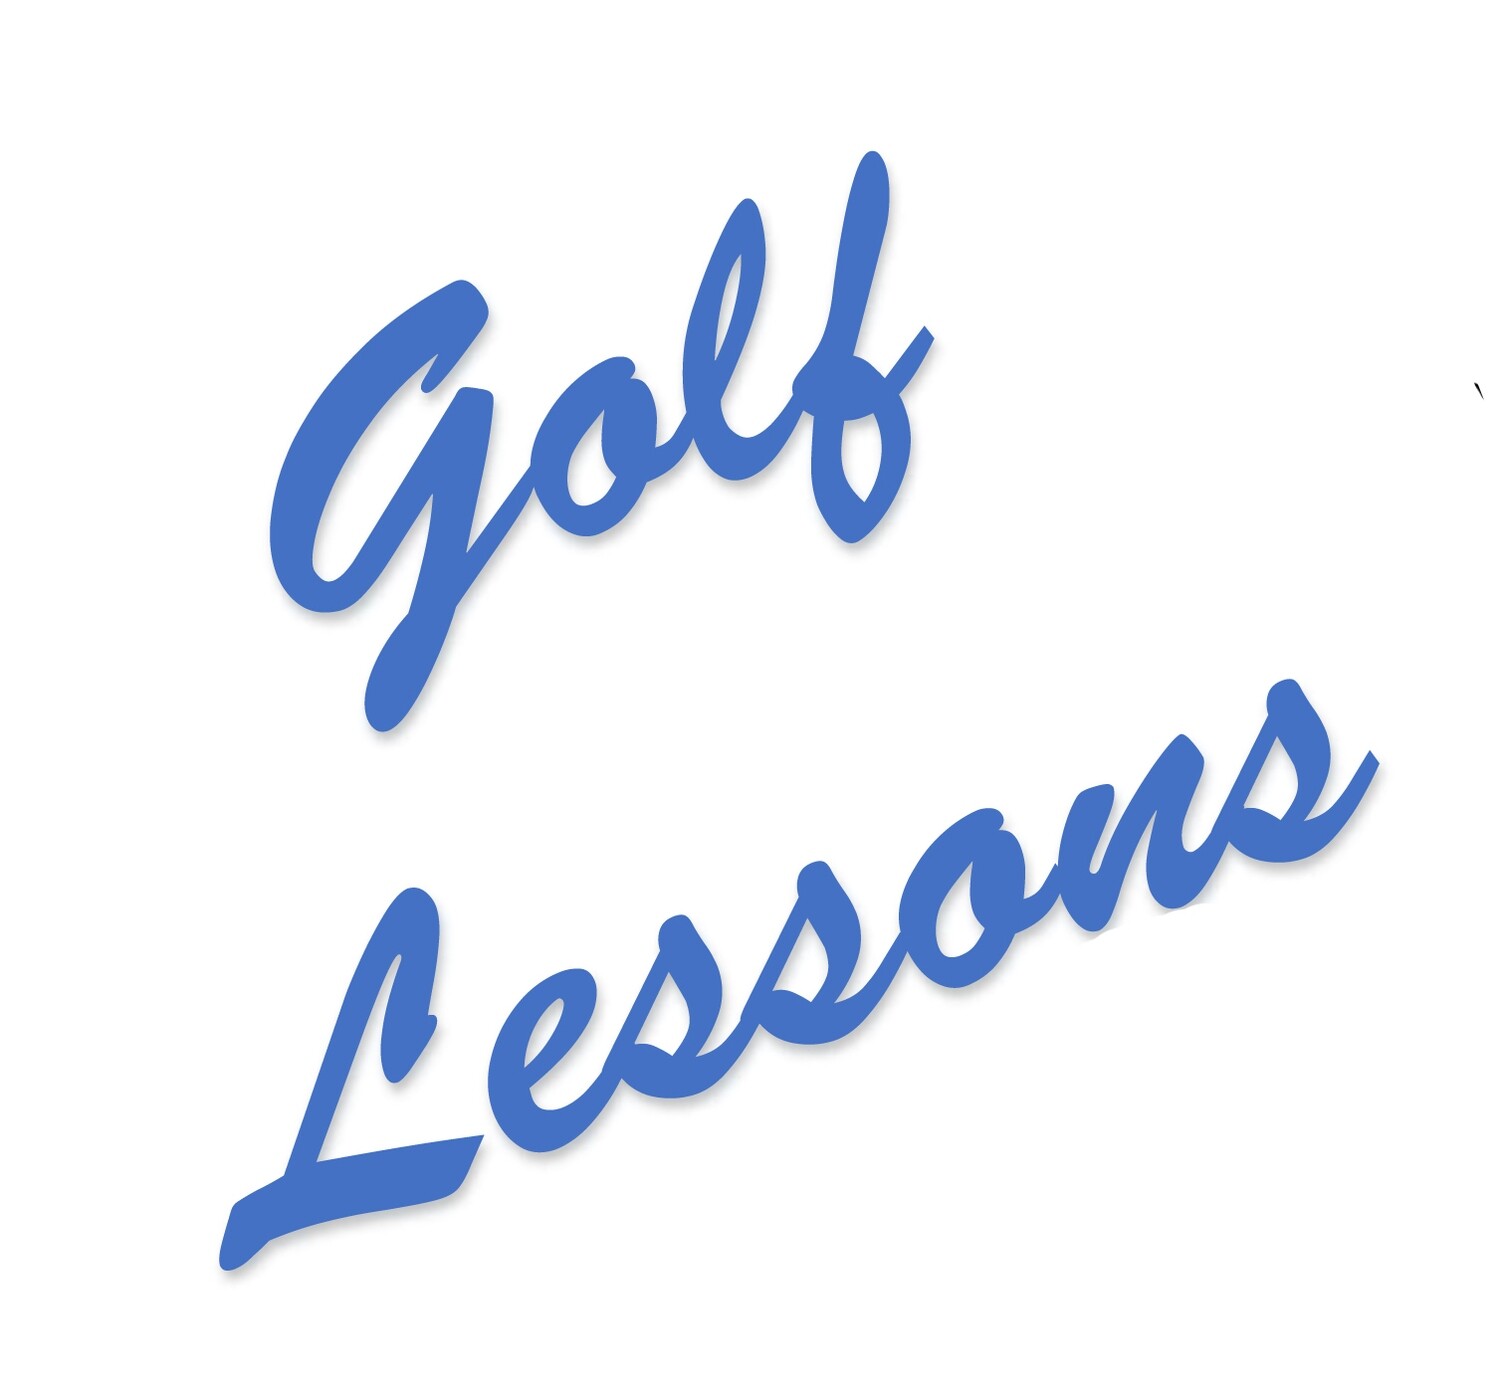 Series Golf Lesson - Buy 5 Get 1 FREE